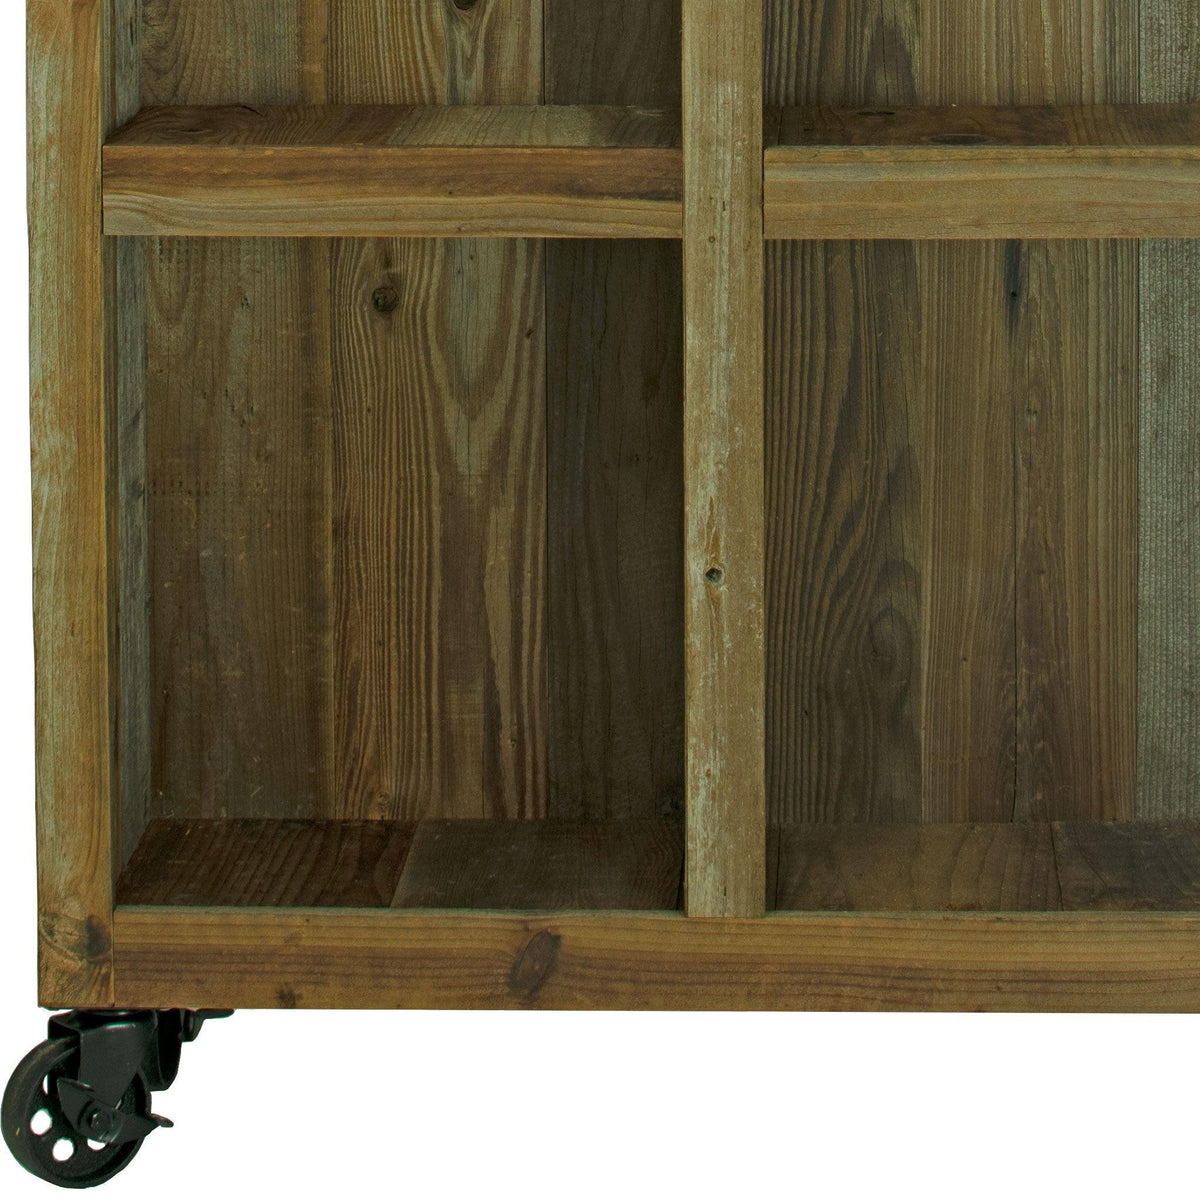 Bottom closeup photo of Lee Display's brand new Outdoor Rolling Redwood Storage Cabinet with Wheels.  Shelving Unit with 5in Black Casters on sale at leedisplay.com